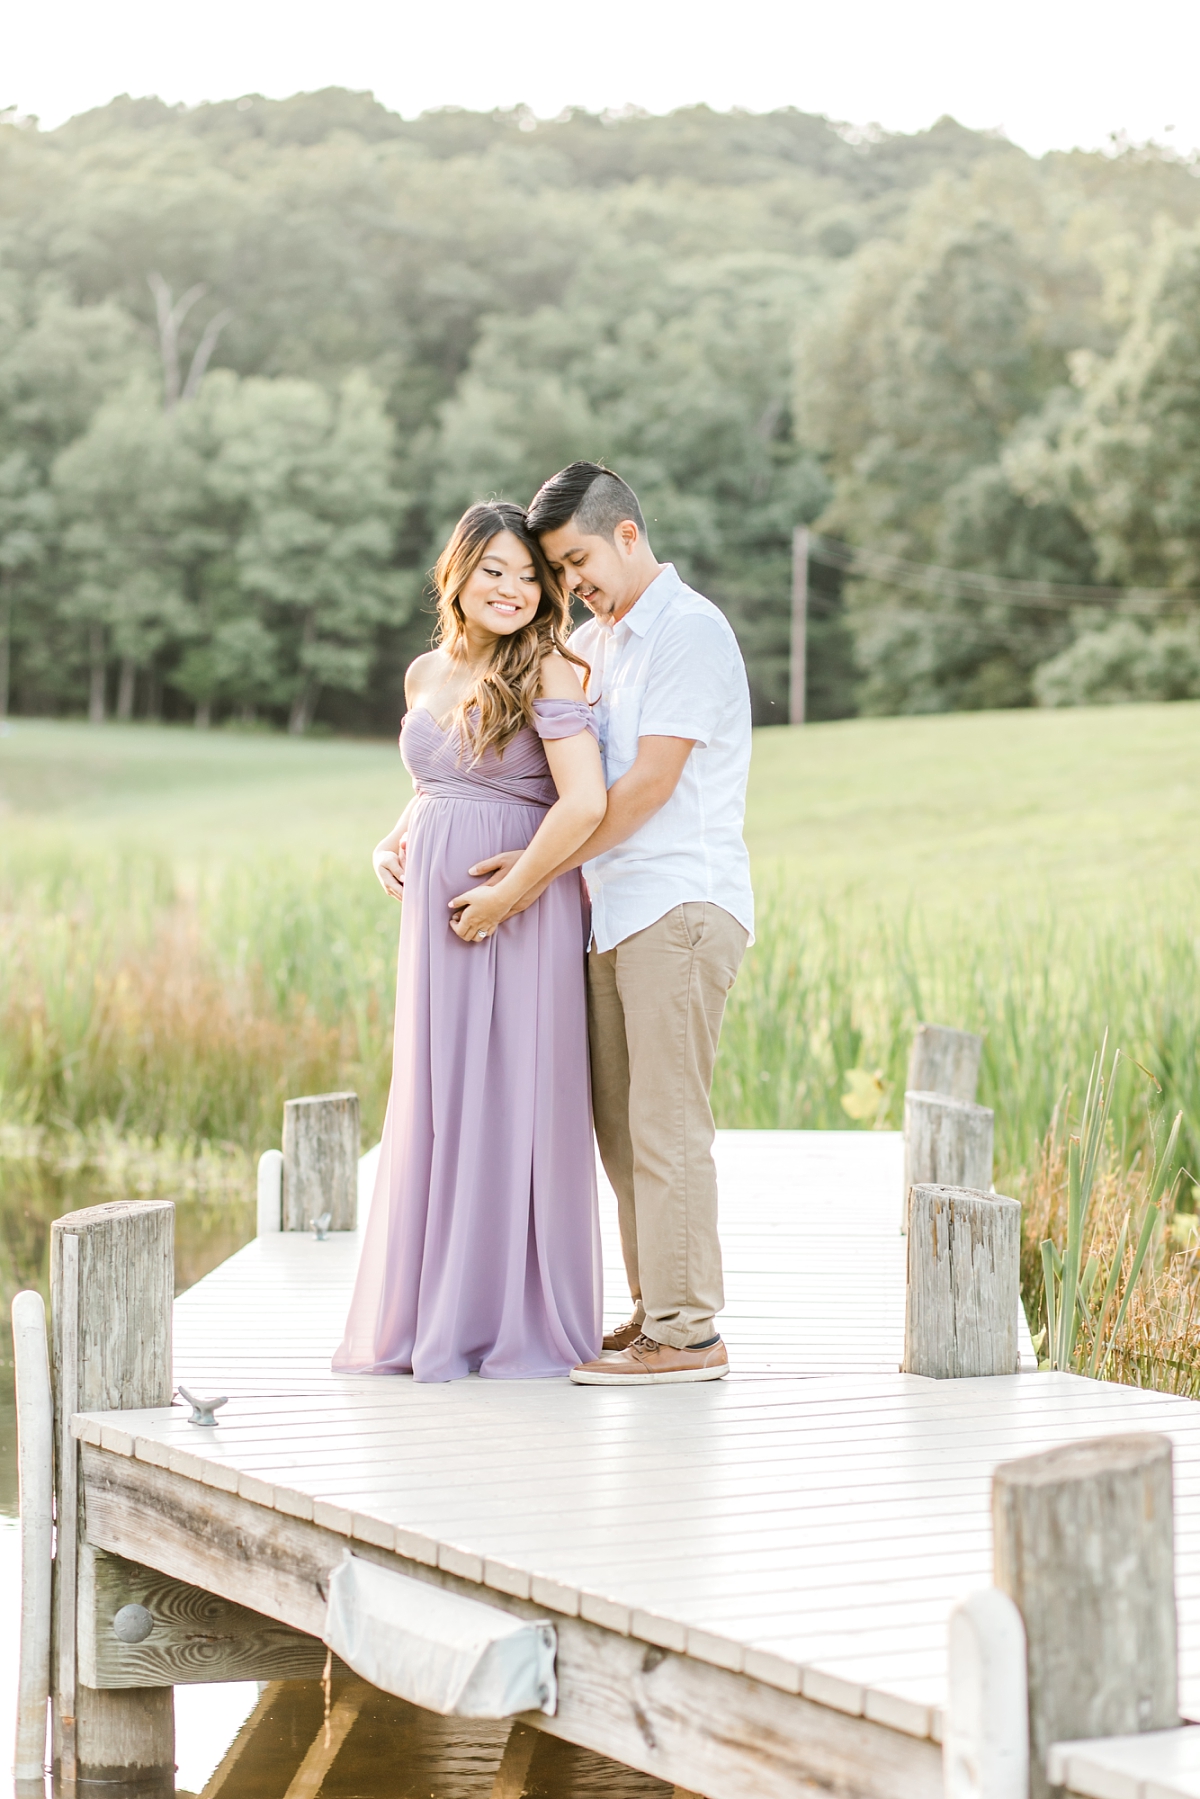 greenbrier maternity session photography photo 4.JPG